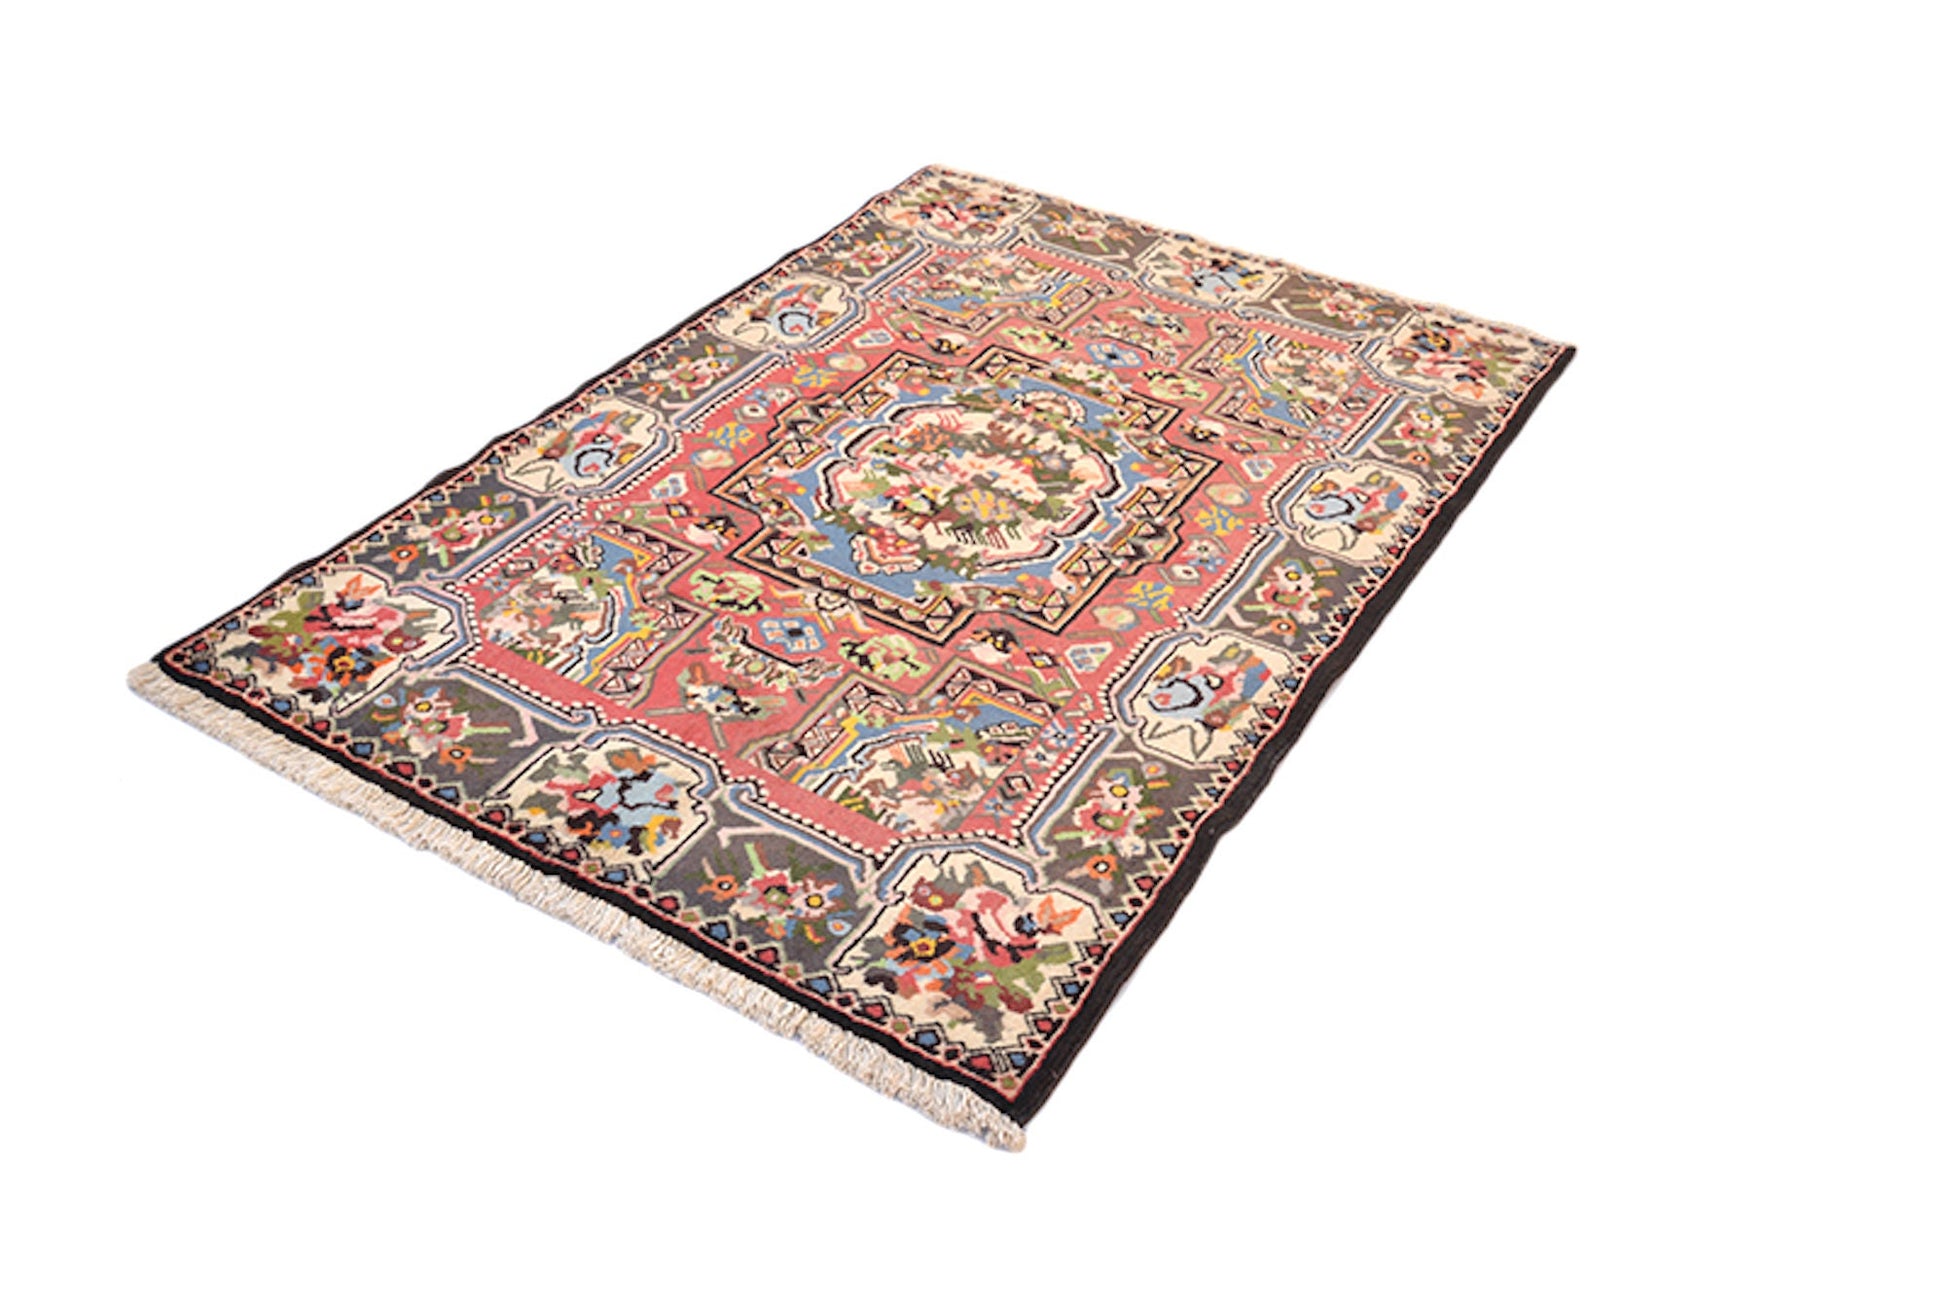 Vintage Floral Rug 4x5 Pink and Brown | Colorful Antique Caucasian Rug | Oriental Border with Accents of Blue